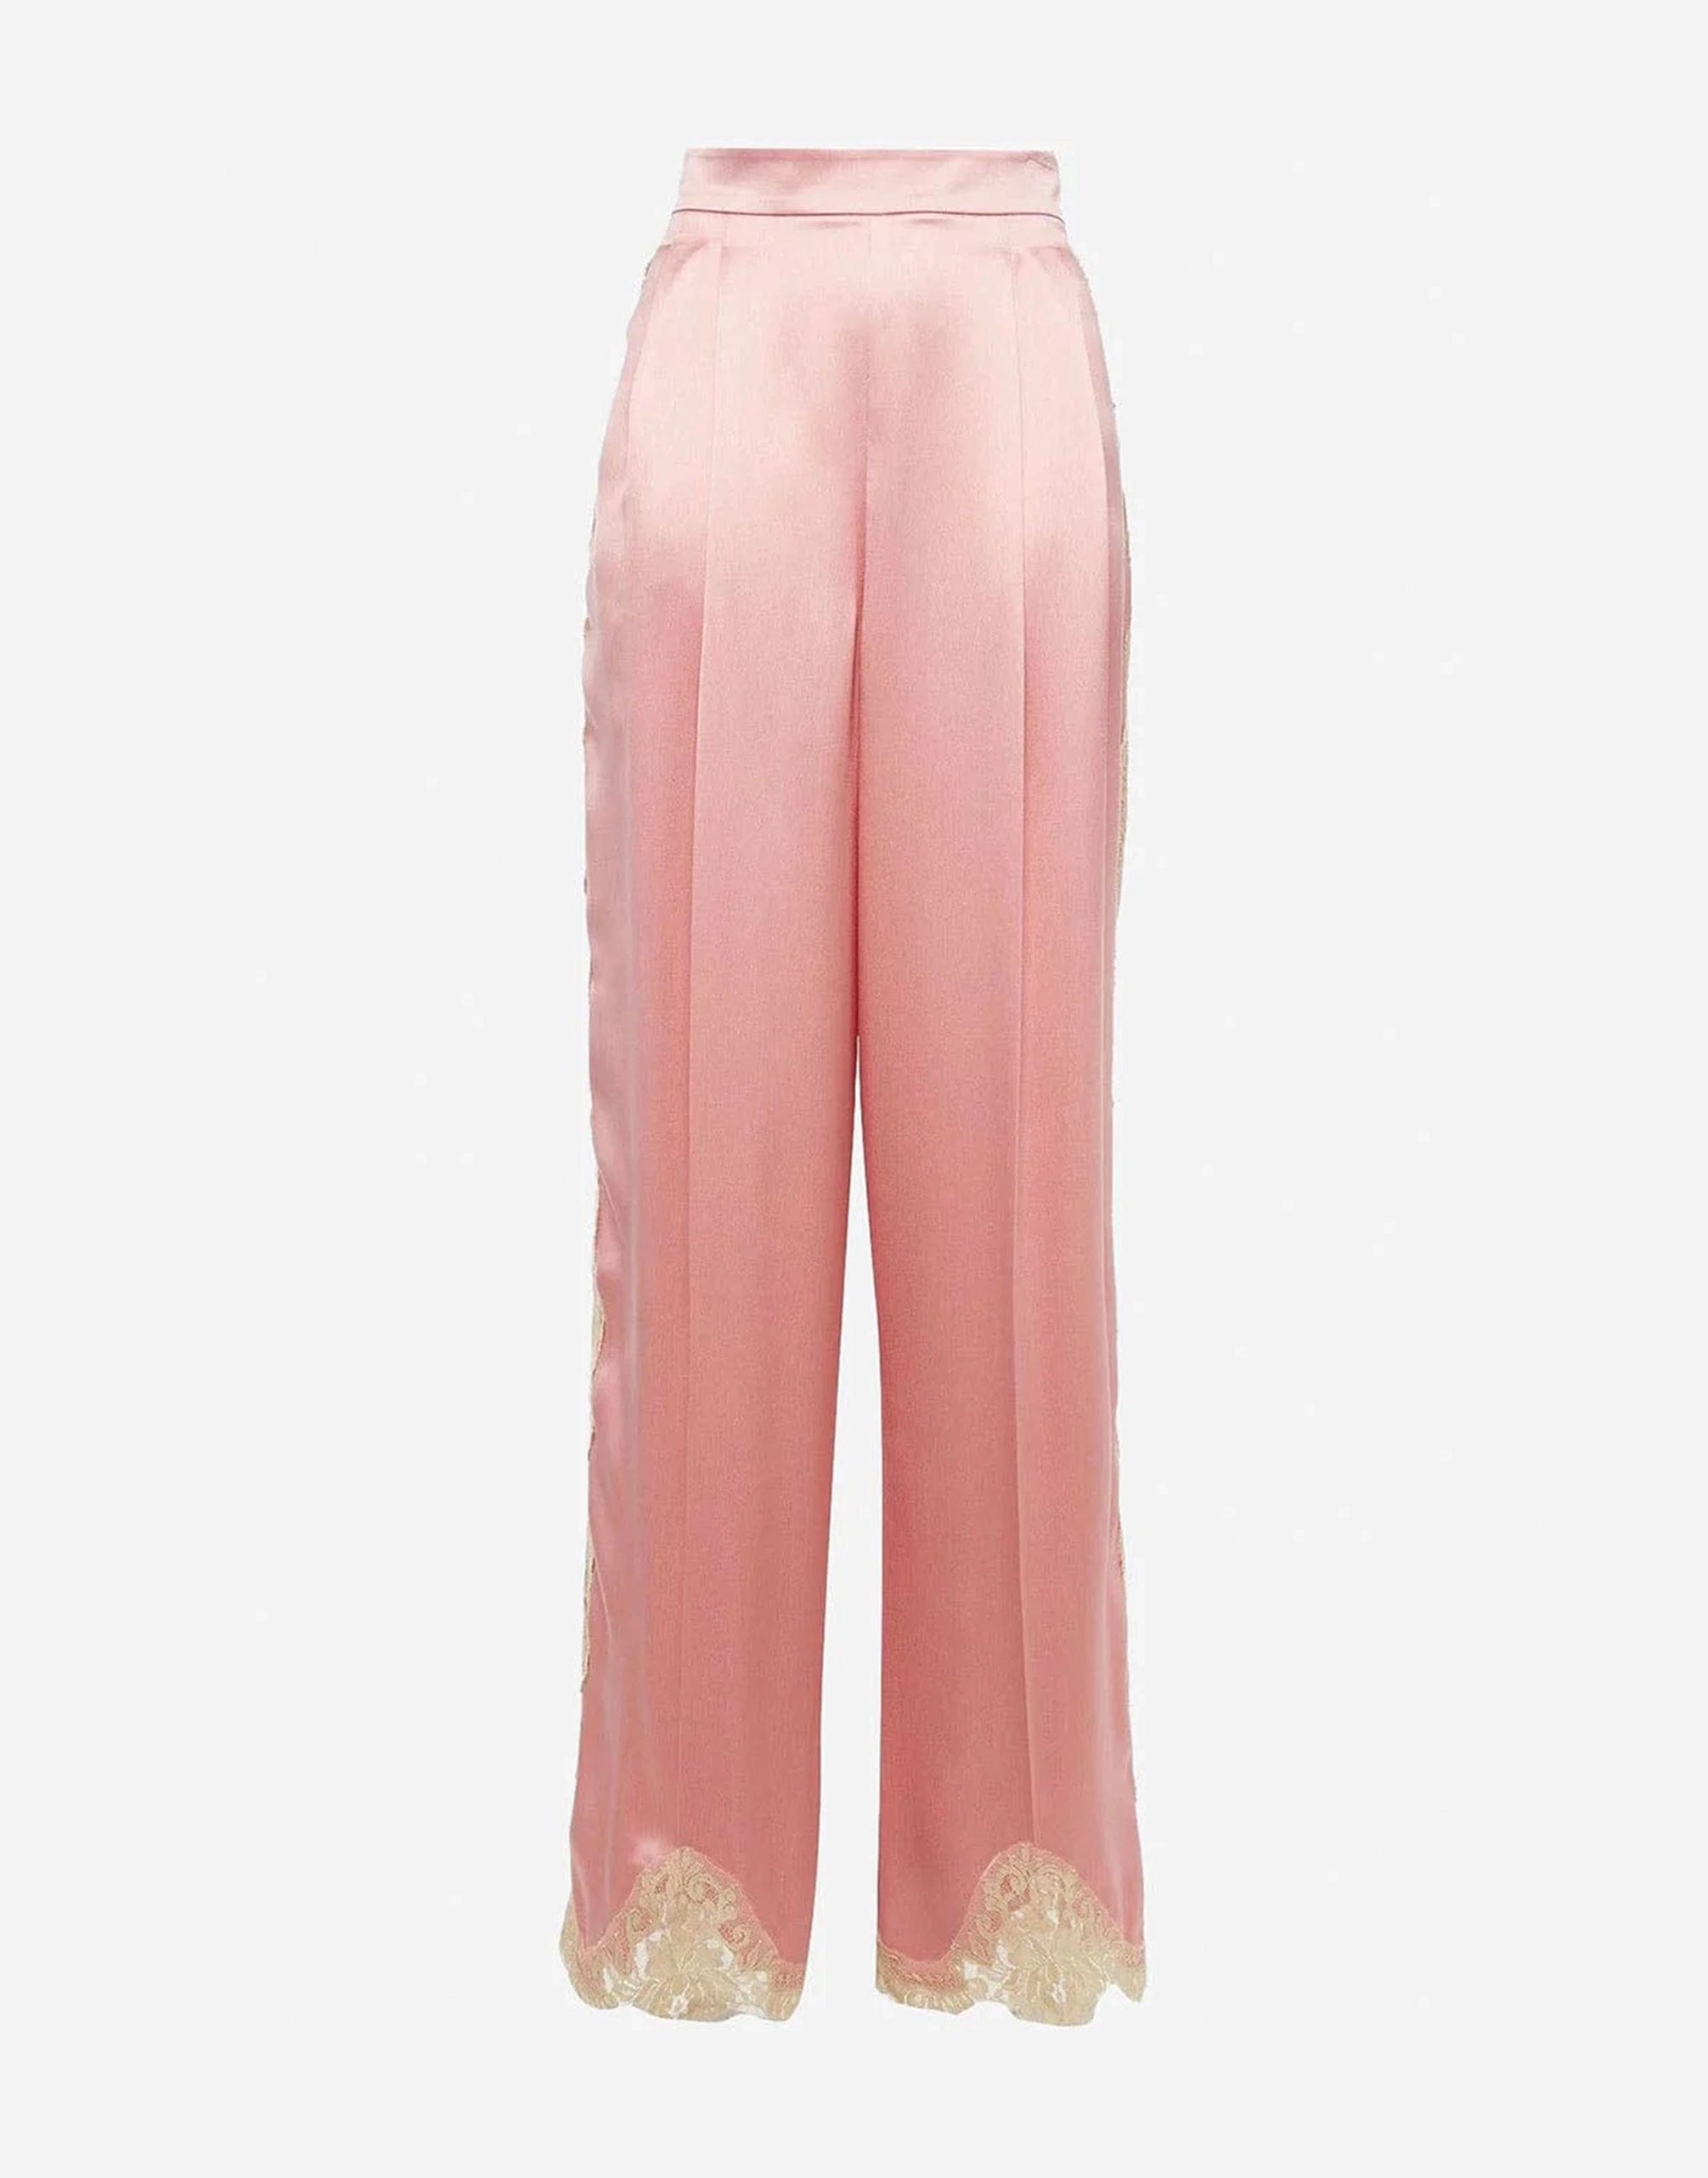 Dolce & Gabbana Lace-Trimmed Silk Trousers